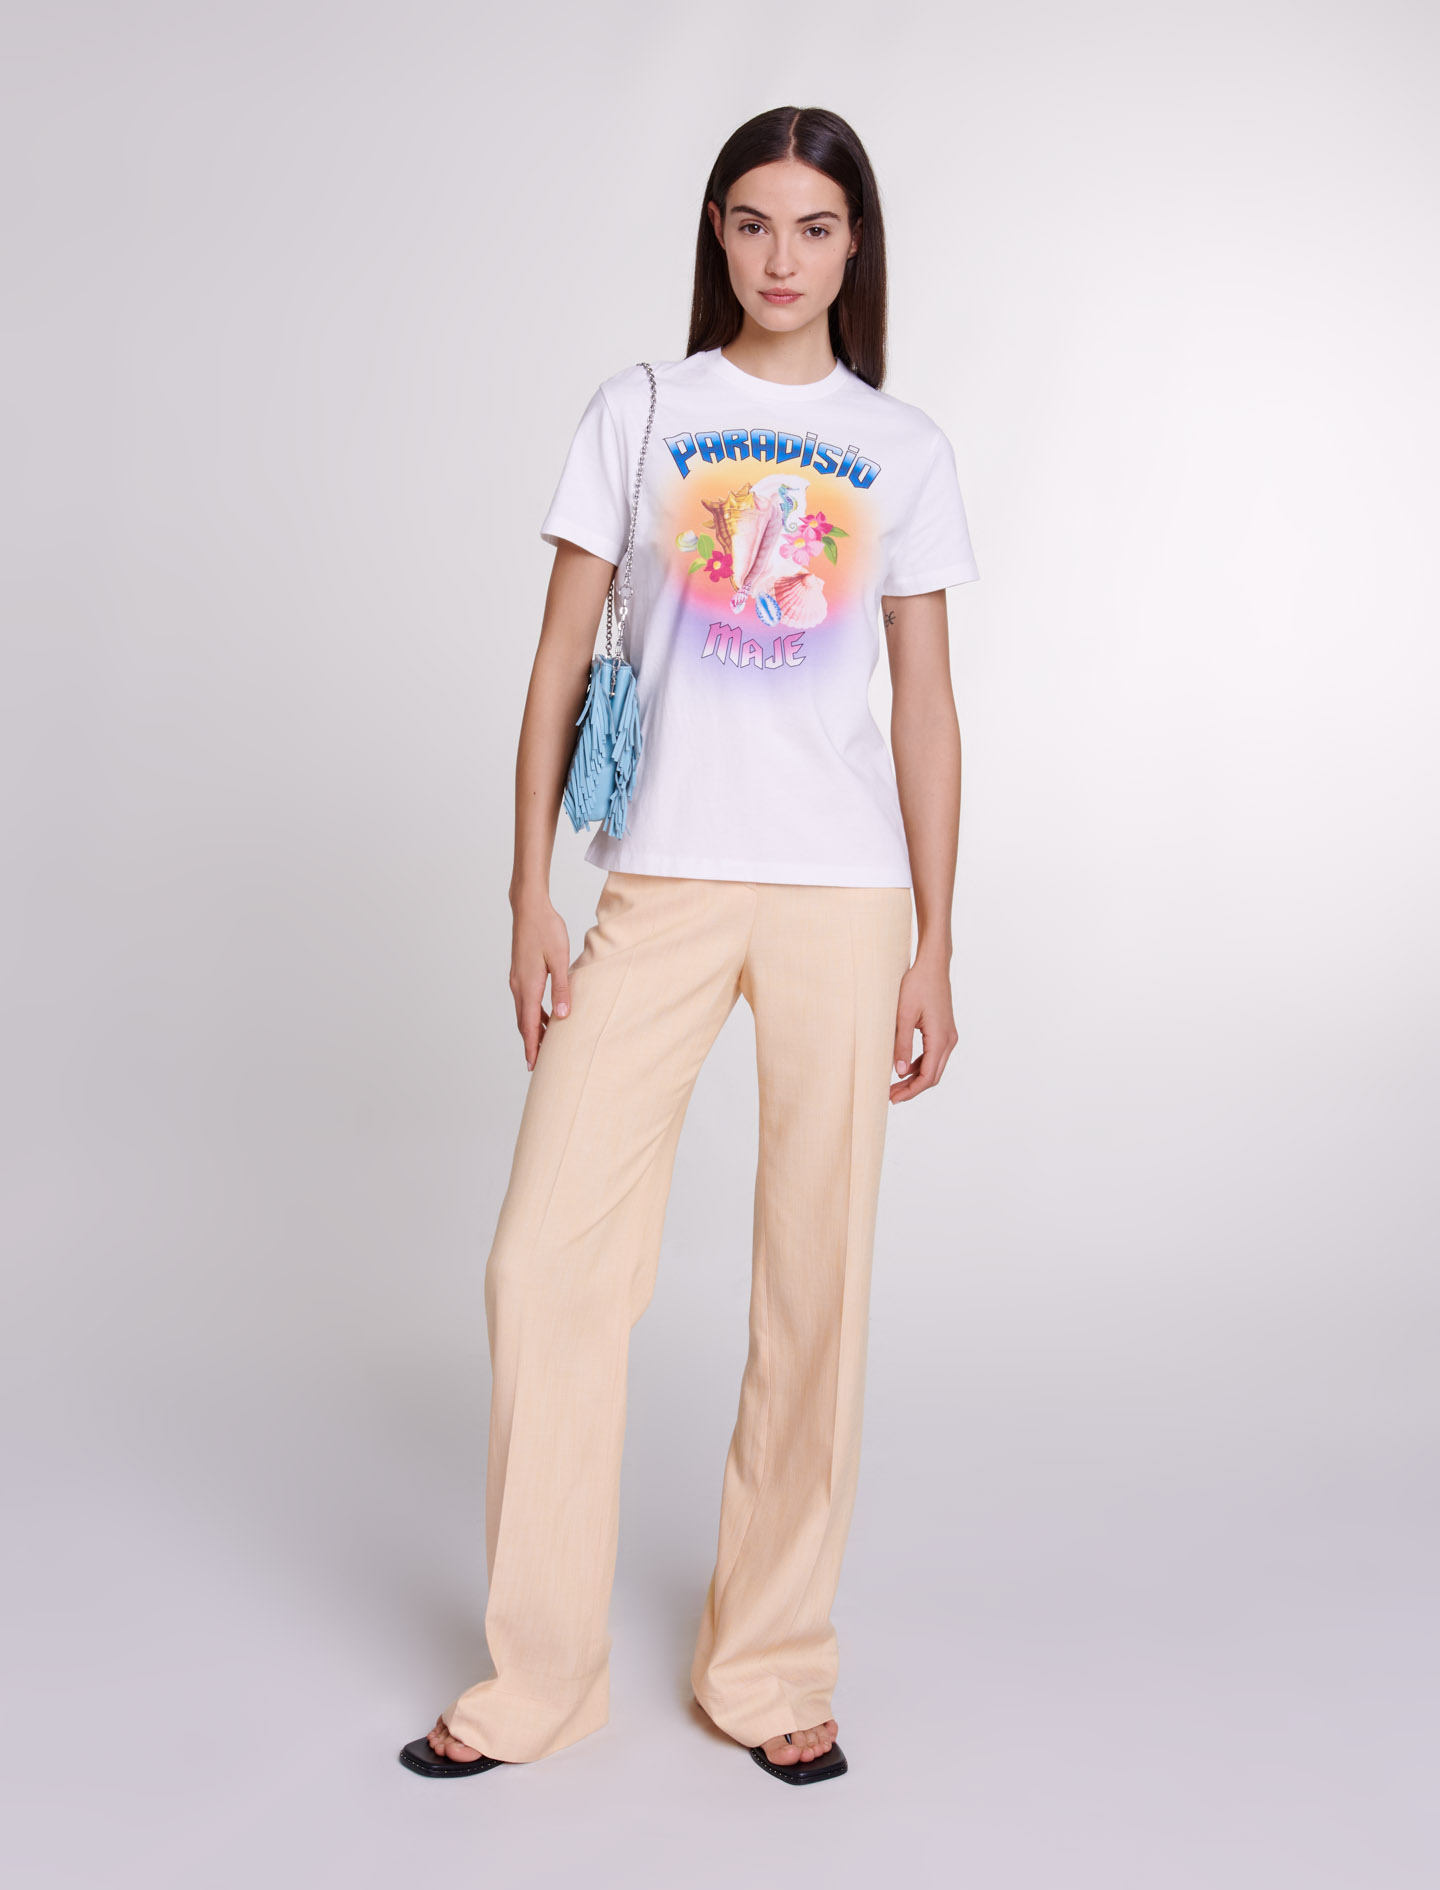 Maje Woman's cotton Rib: Paradisio printed t-shirt for Spring/Summer, in color Ecru / Beige